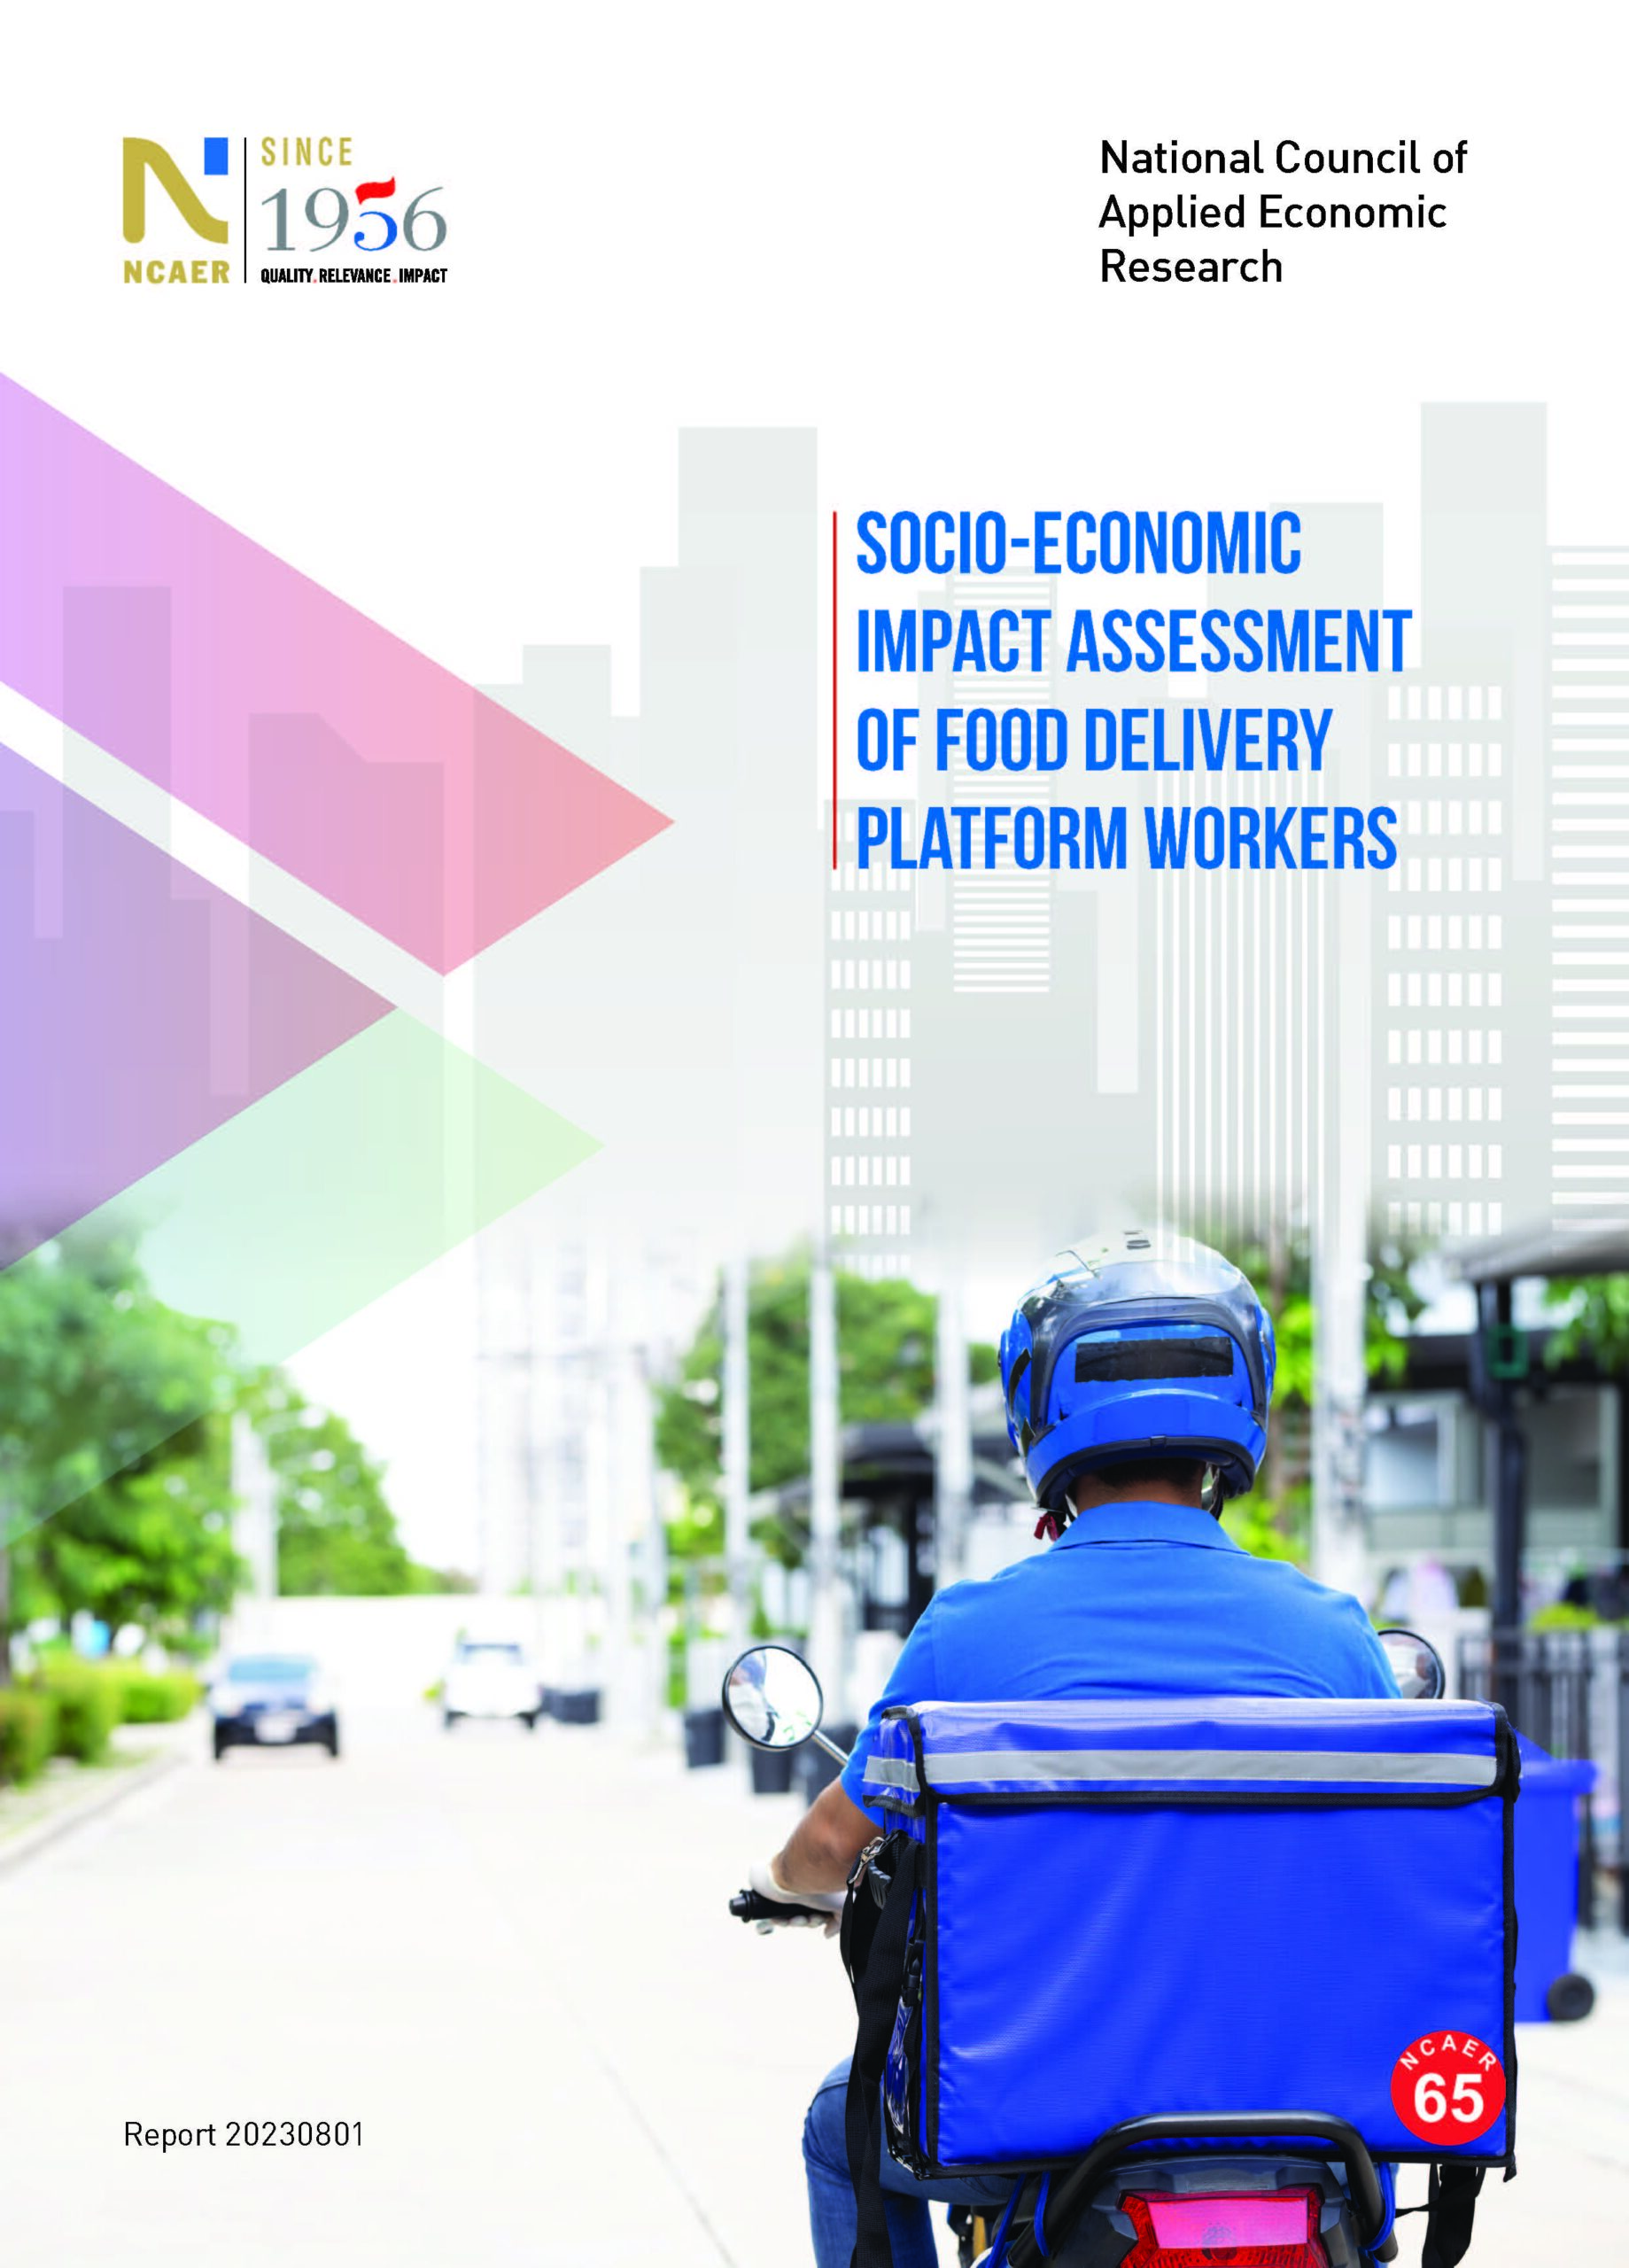 Socio-economic Impact Assessment of Food Delivery Platform Workers